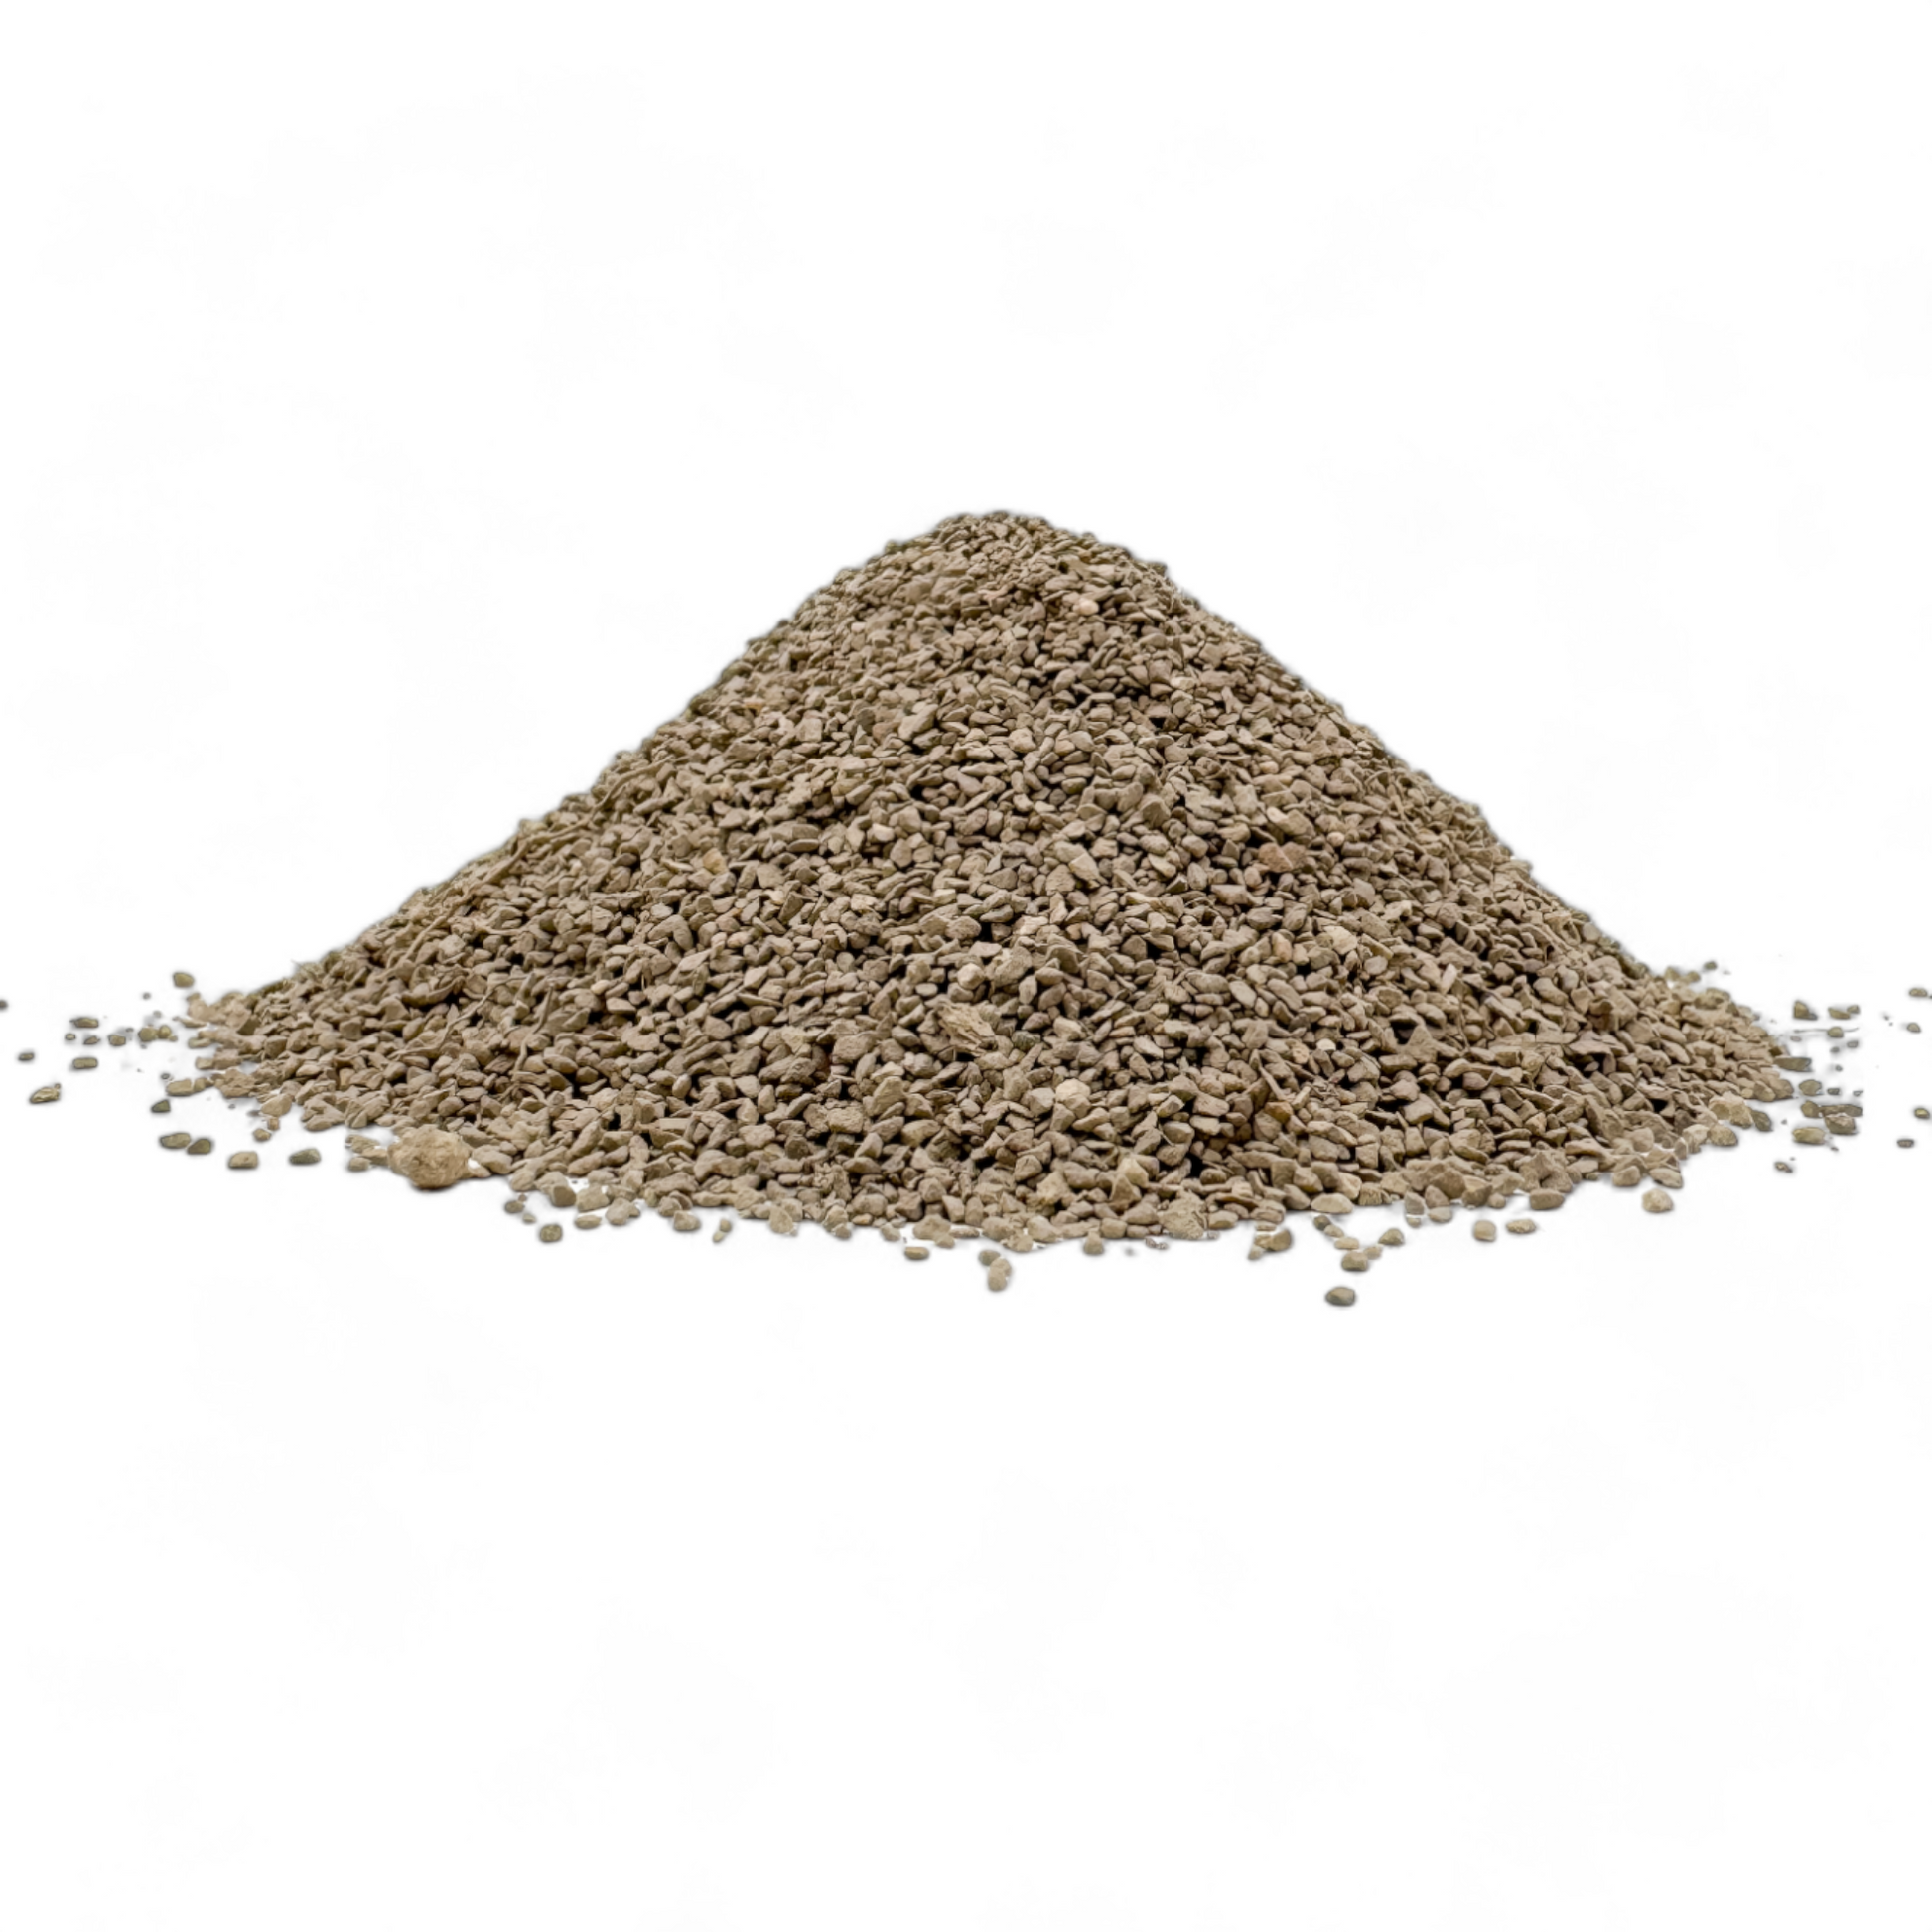 Pile of Azomite mineral soil amendment on a white background